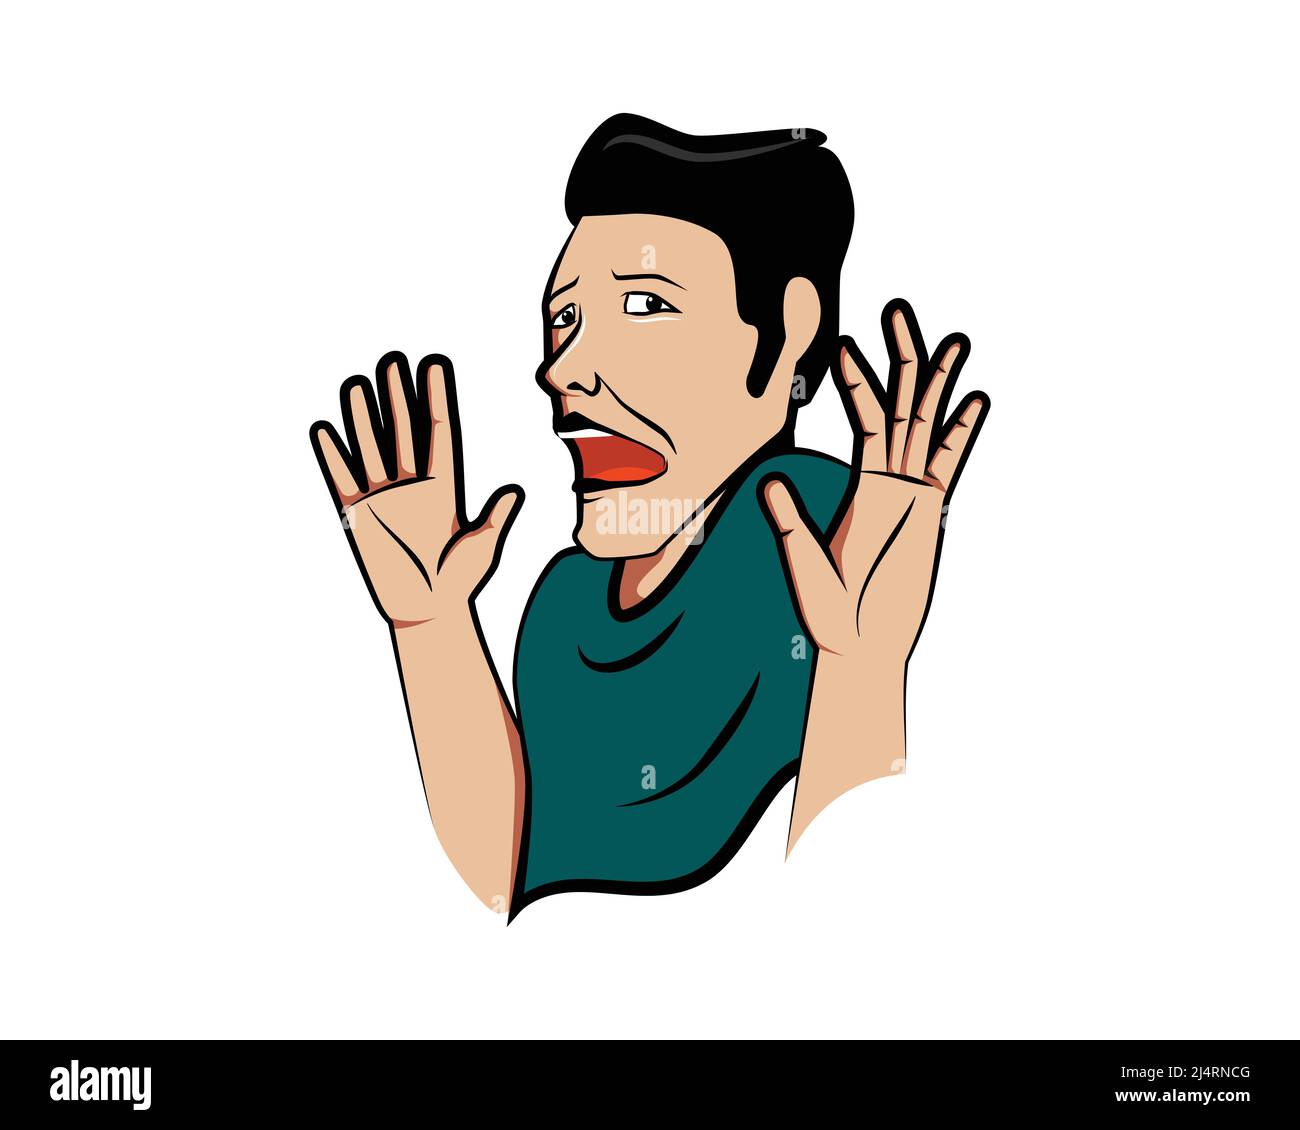 Scared and Frightened Man Illustration Vector Stock Vector